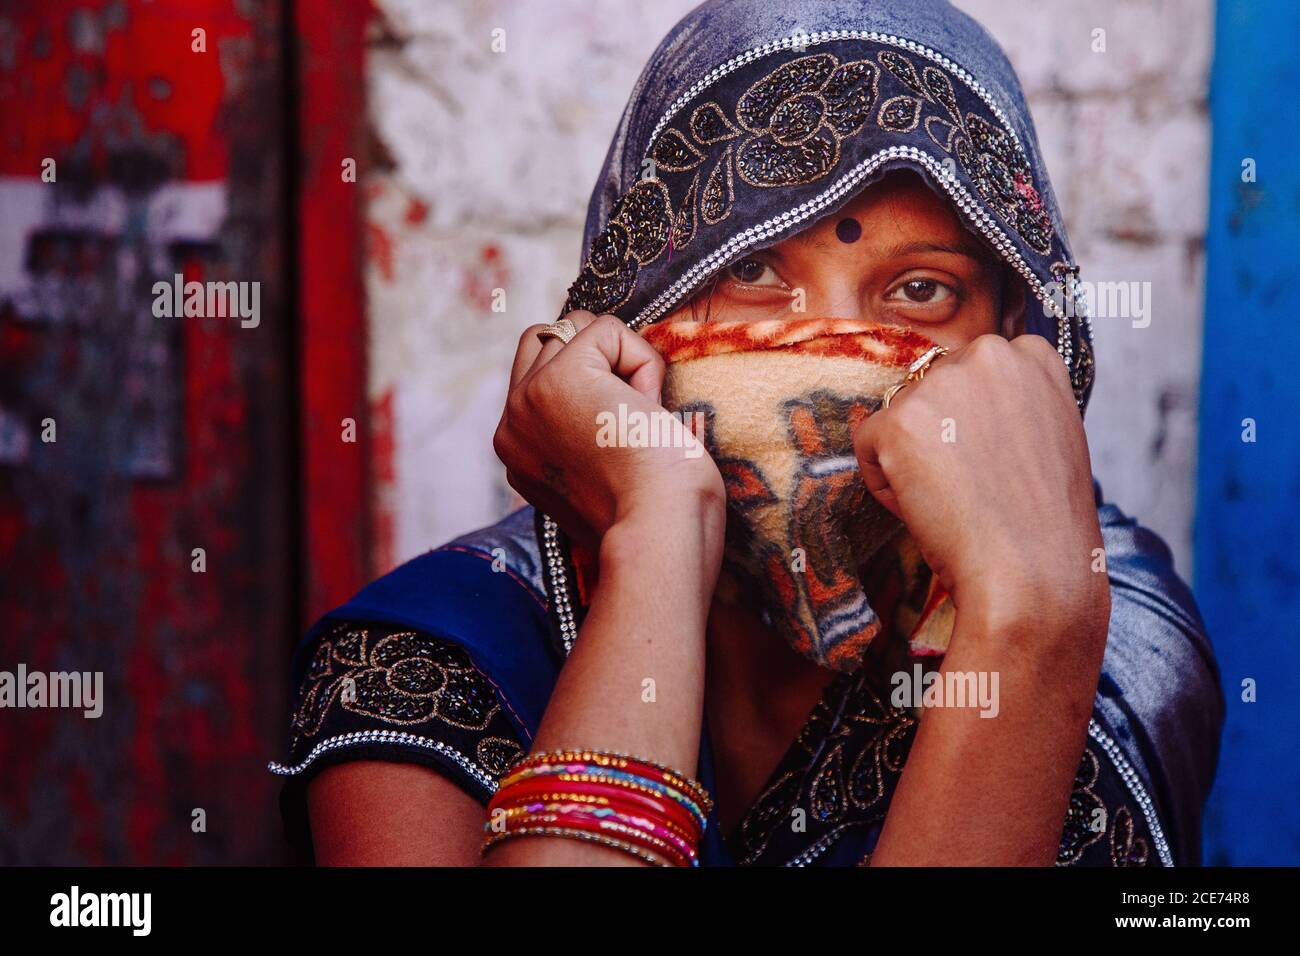 India - March 9, 2020: Charming Indian female in traditional outfit covering face and looking at camera on background of old weathered building Stock Photo